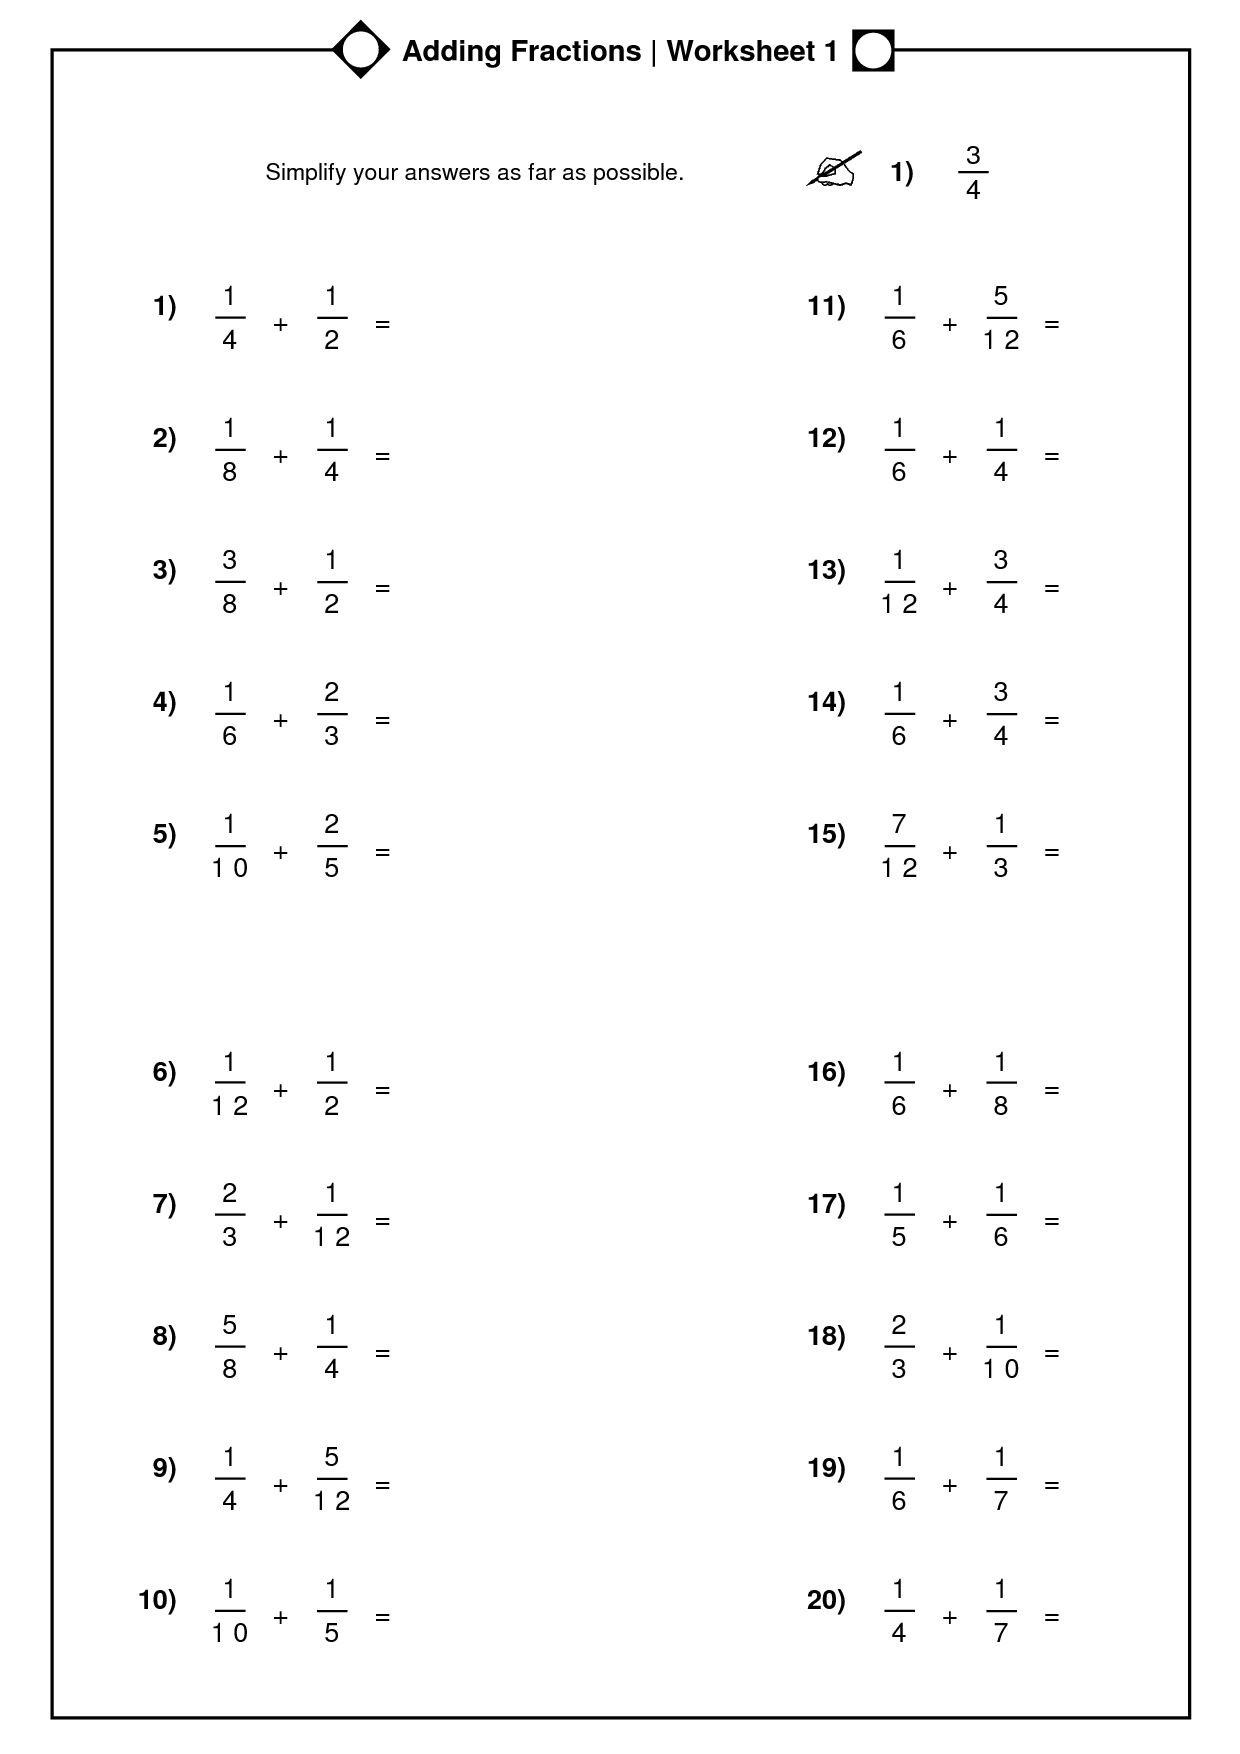 14-best-images-of-adding-subtracting-fractions-with-mixed-numbers-worksheets-adding-fractions